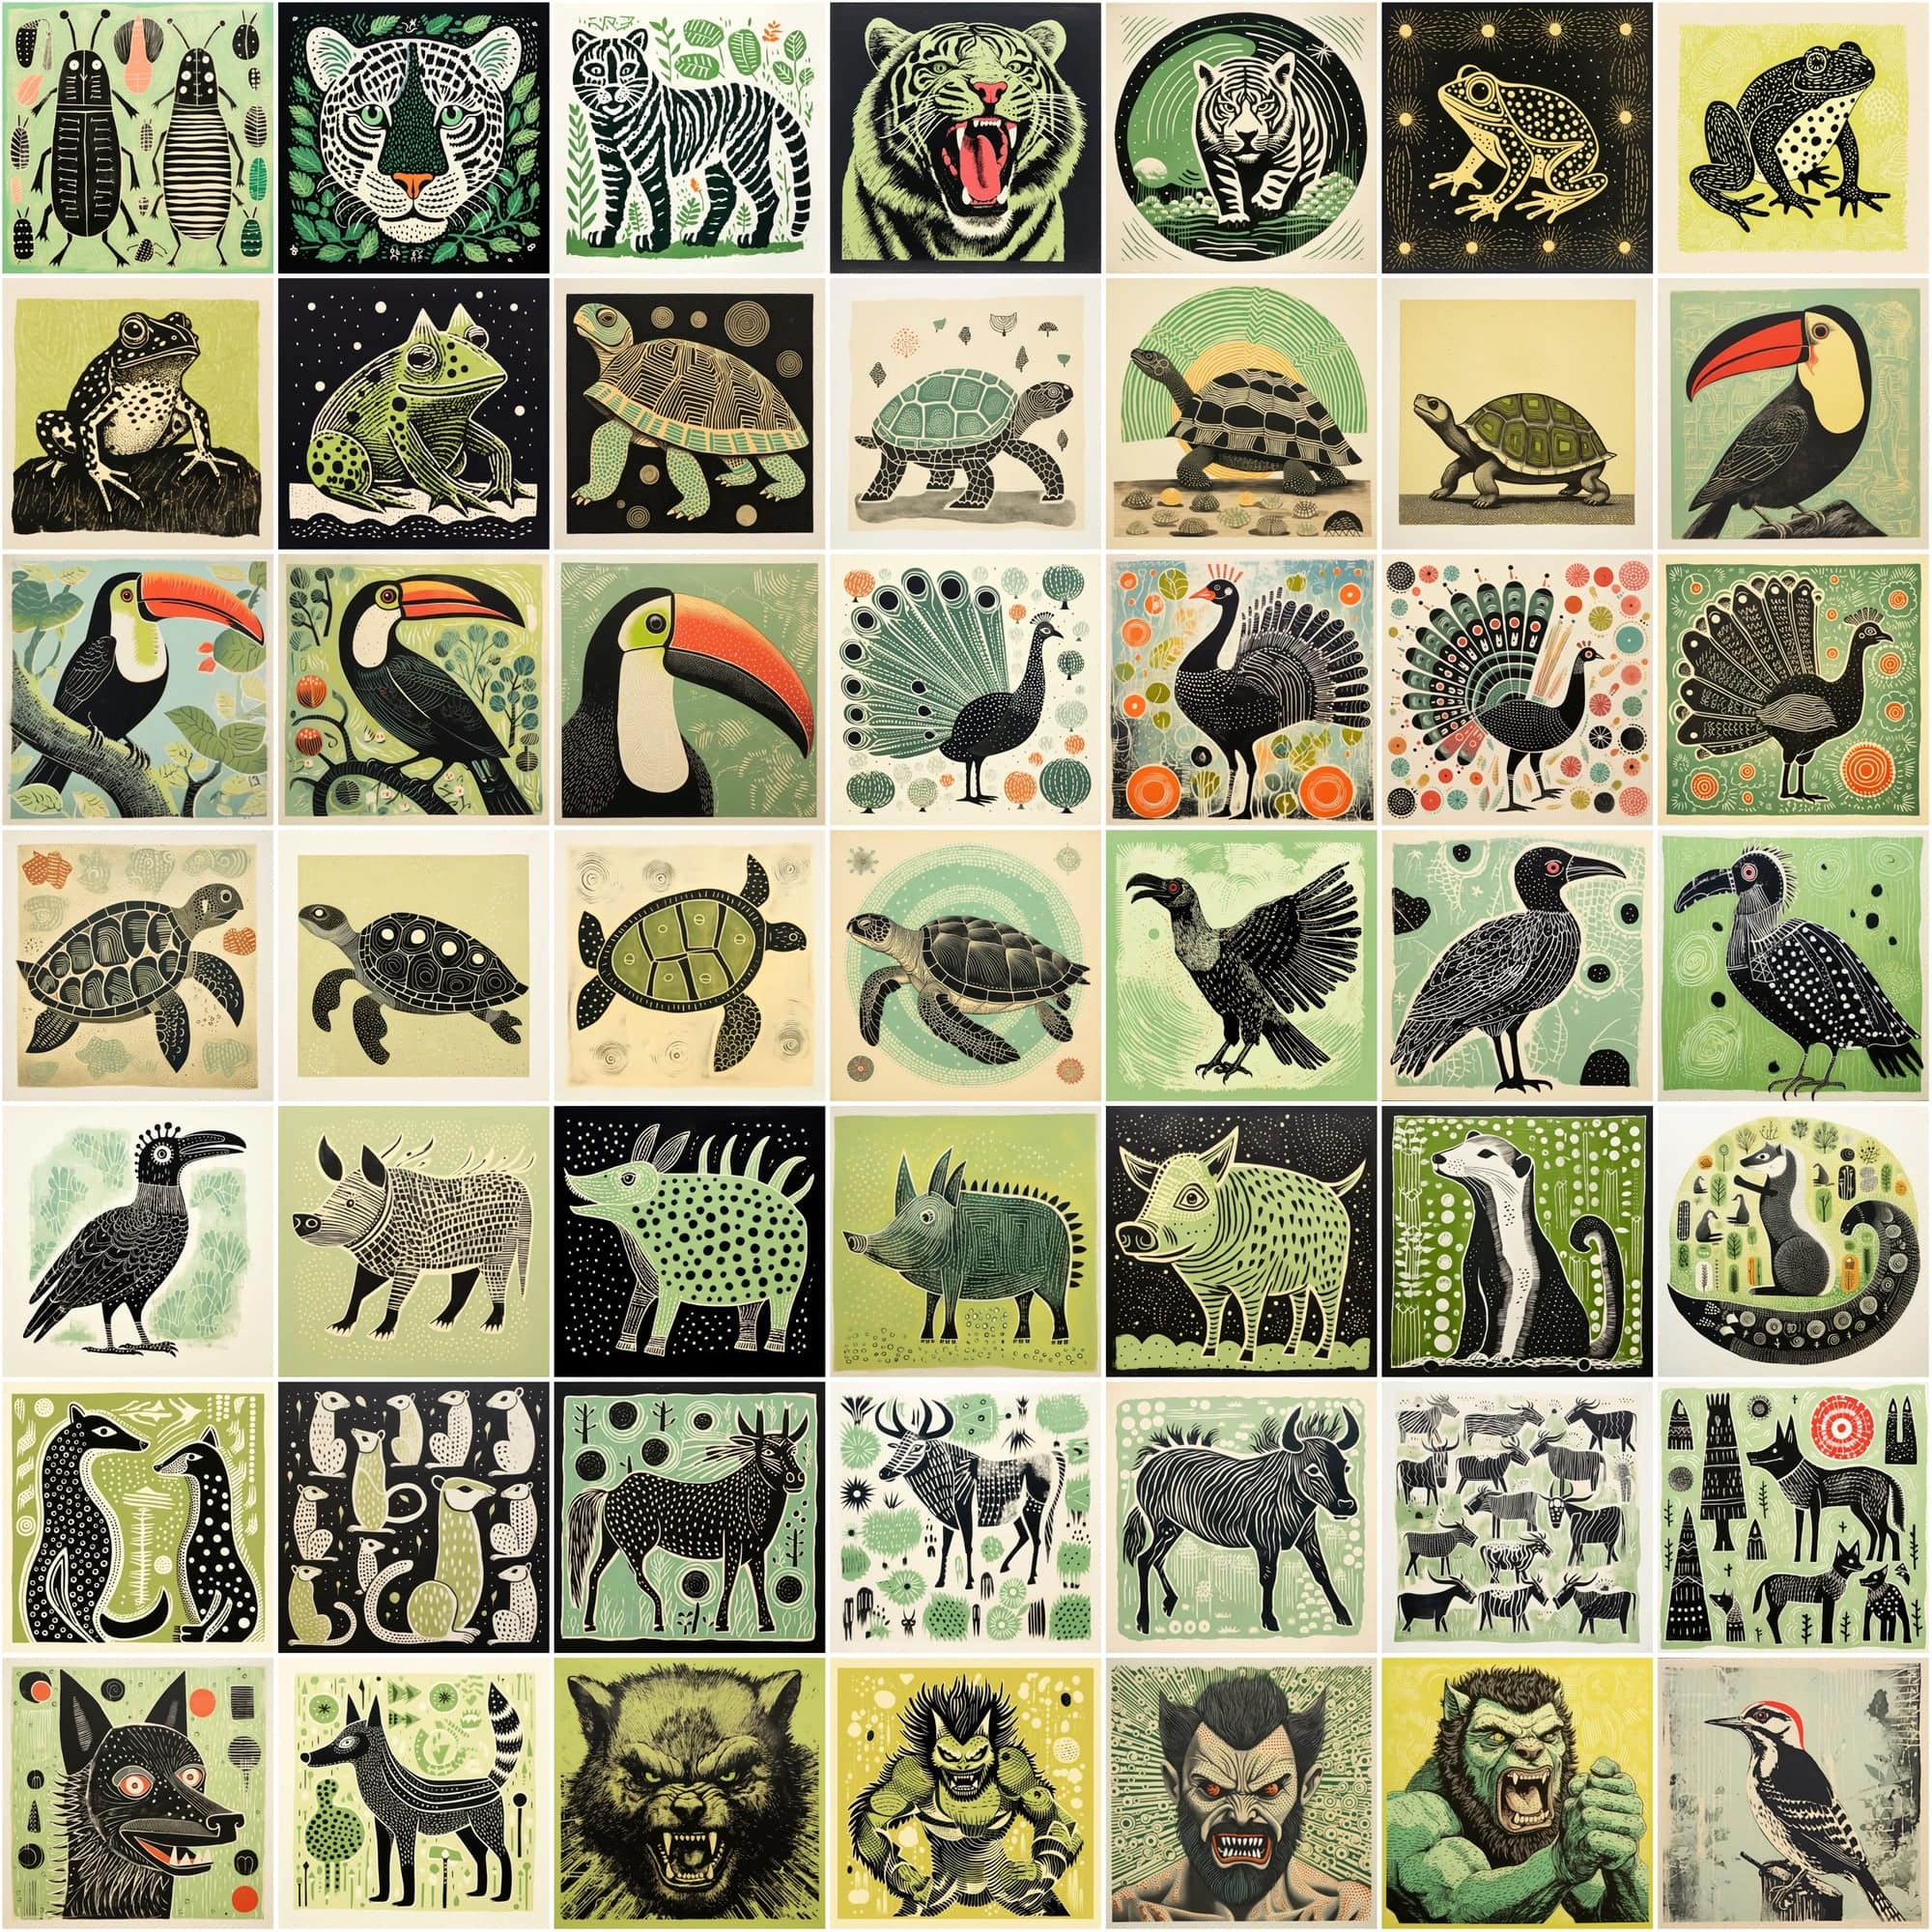 550 Stylized Animal Portraits, Green-Themed Colorful Digital Artwork with Commercial License Digital Download Sumobundle